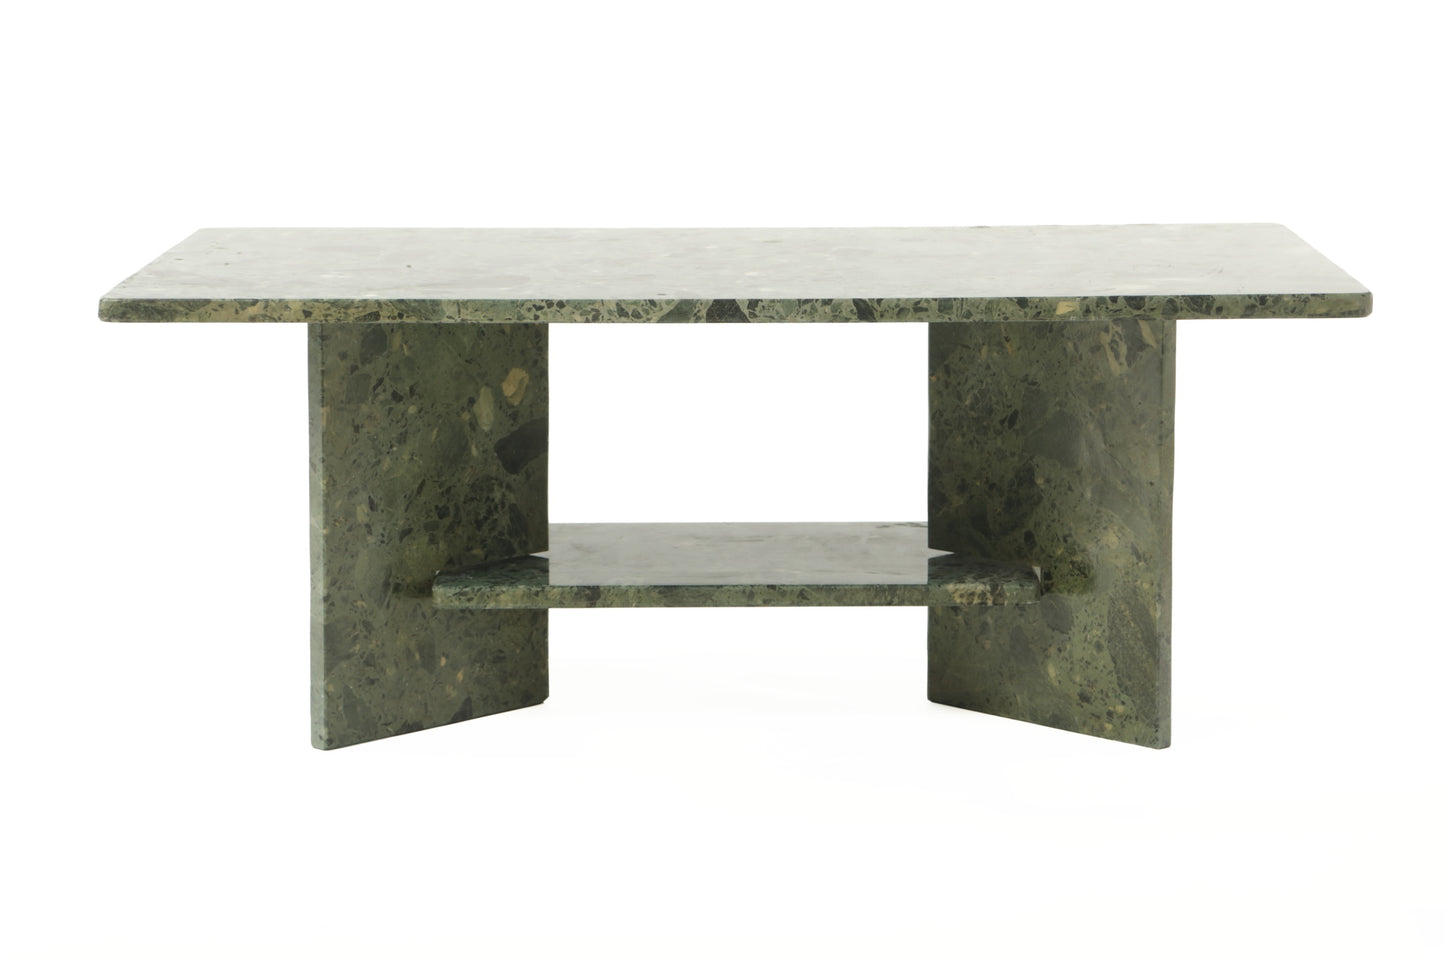 Low table in imperial green marble from the 80s